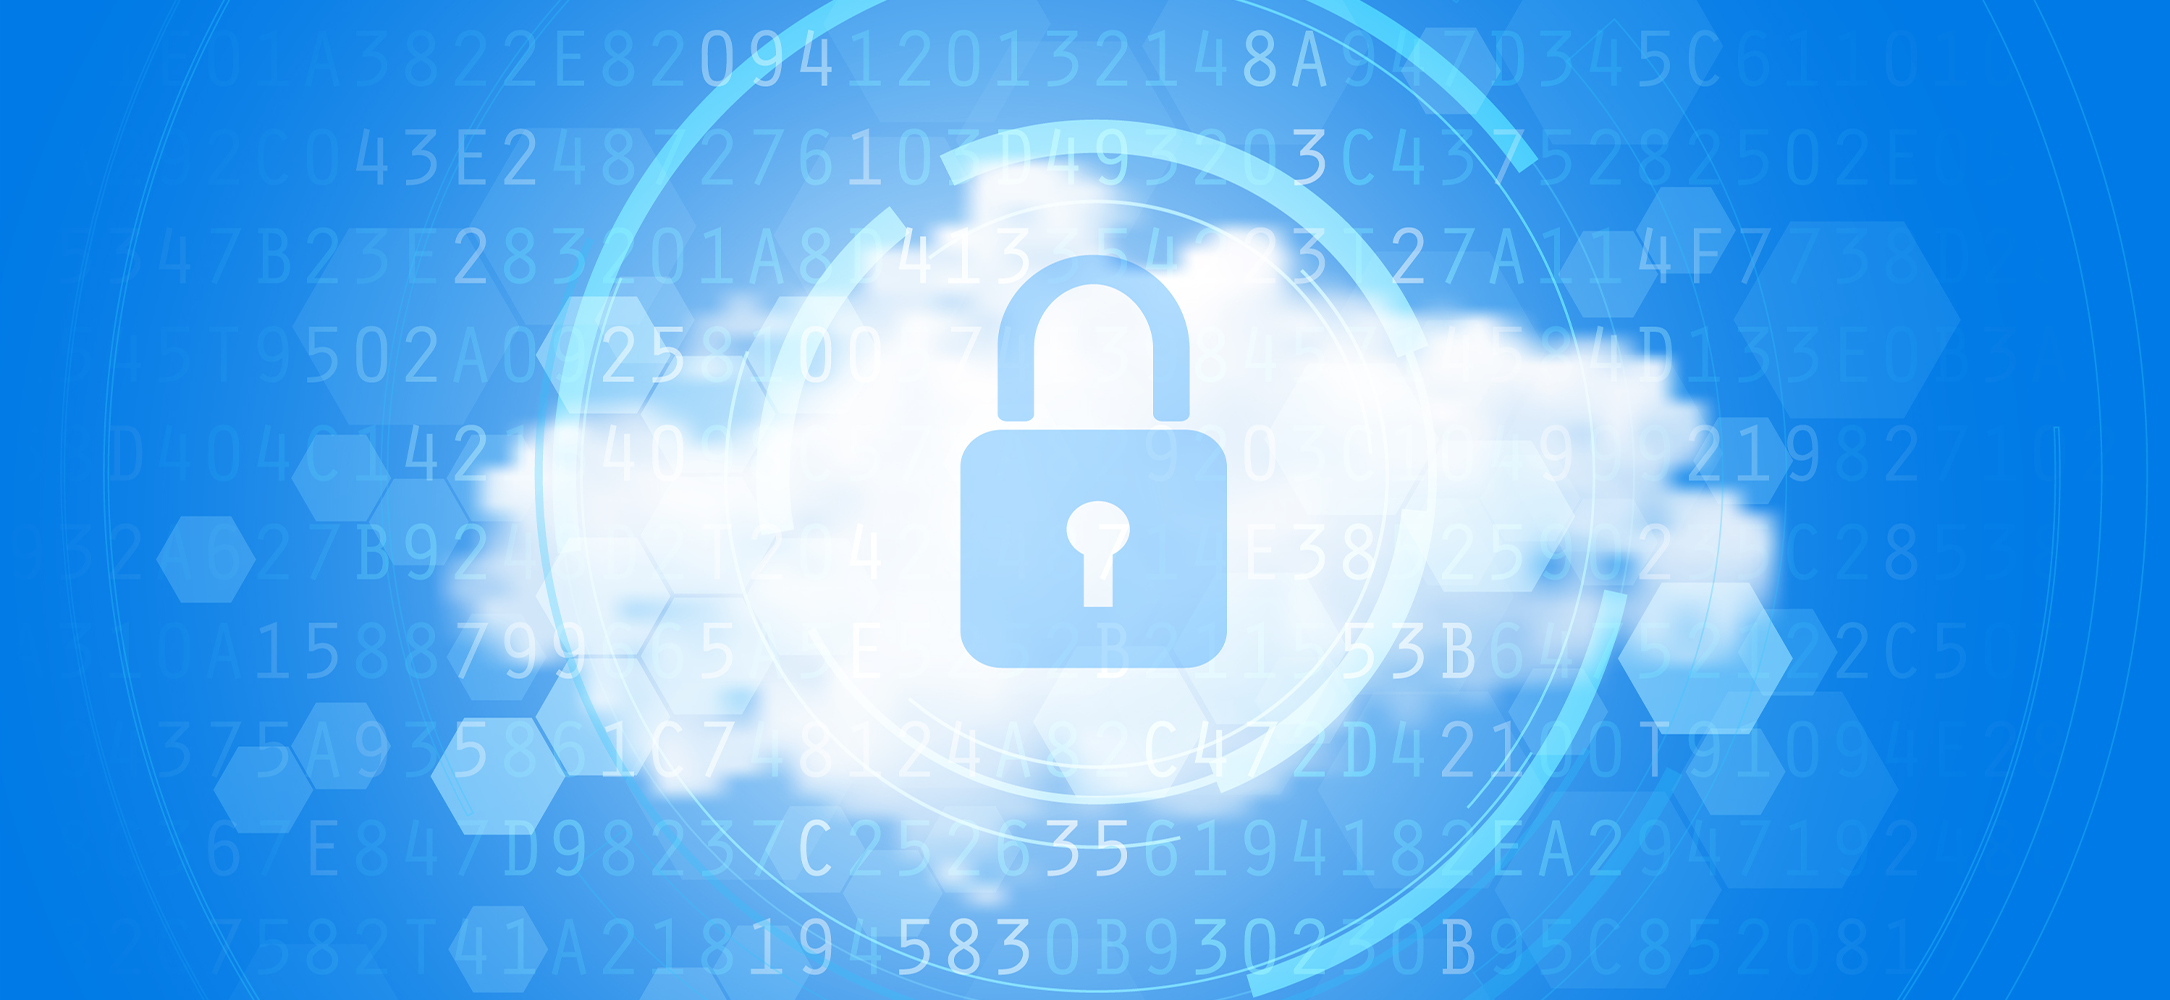 Illustration of a lock on a cloud centered in an aperture design. In the background numbered code, representing data privacy.